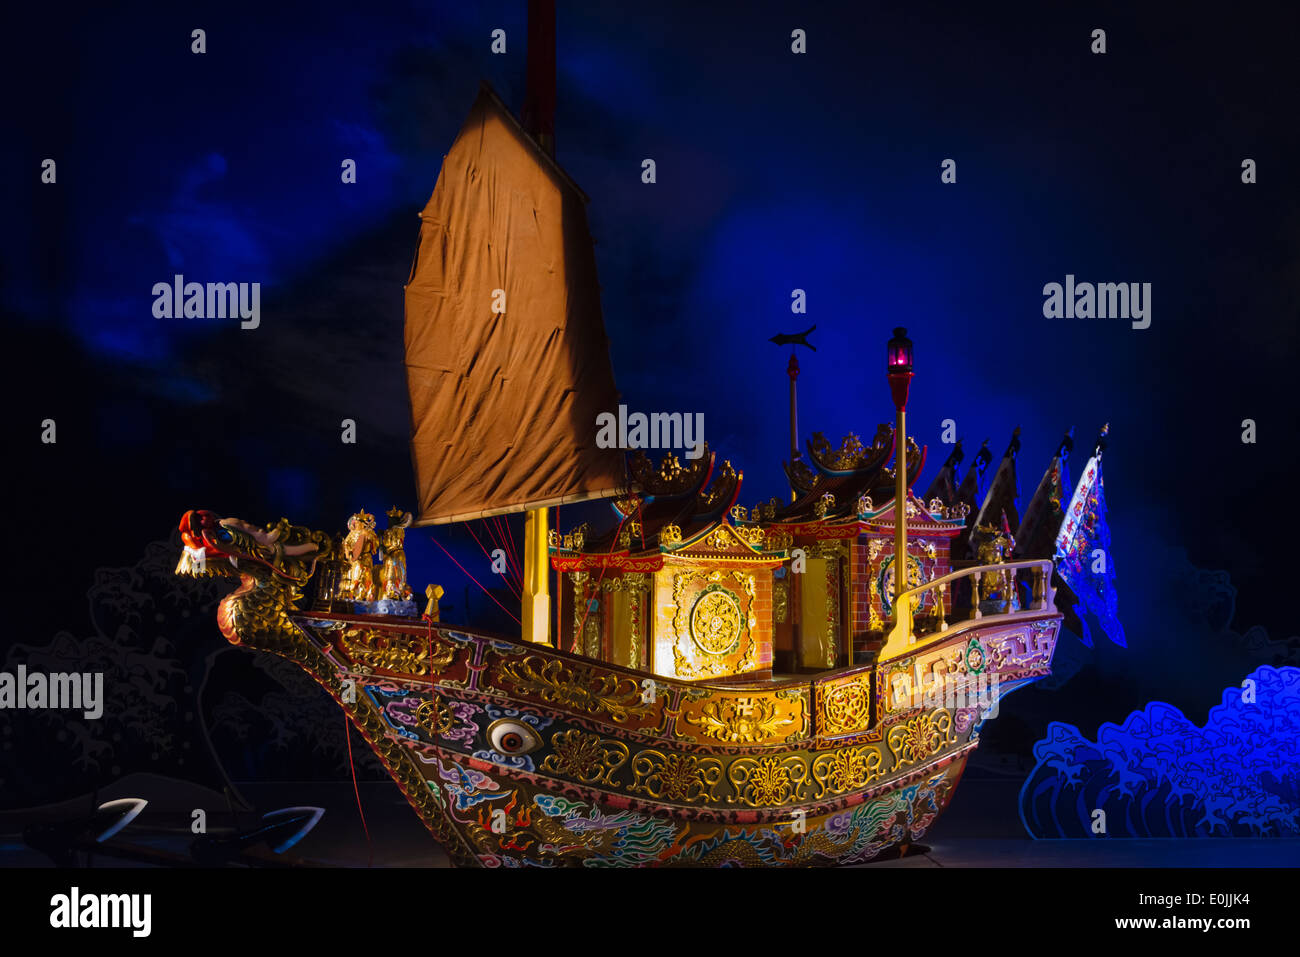 Ship Lantern High Resolution Stock Photography and Images - Alamy